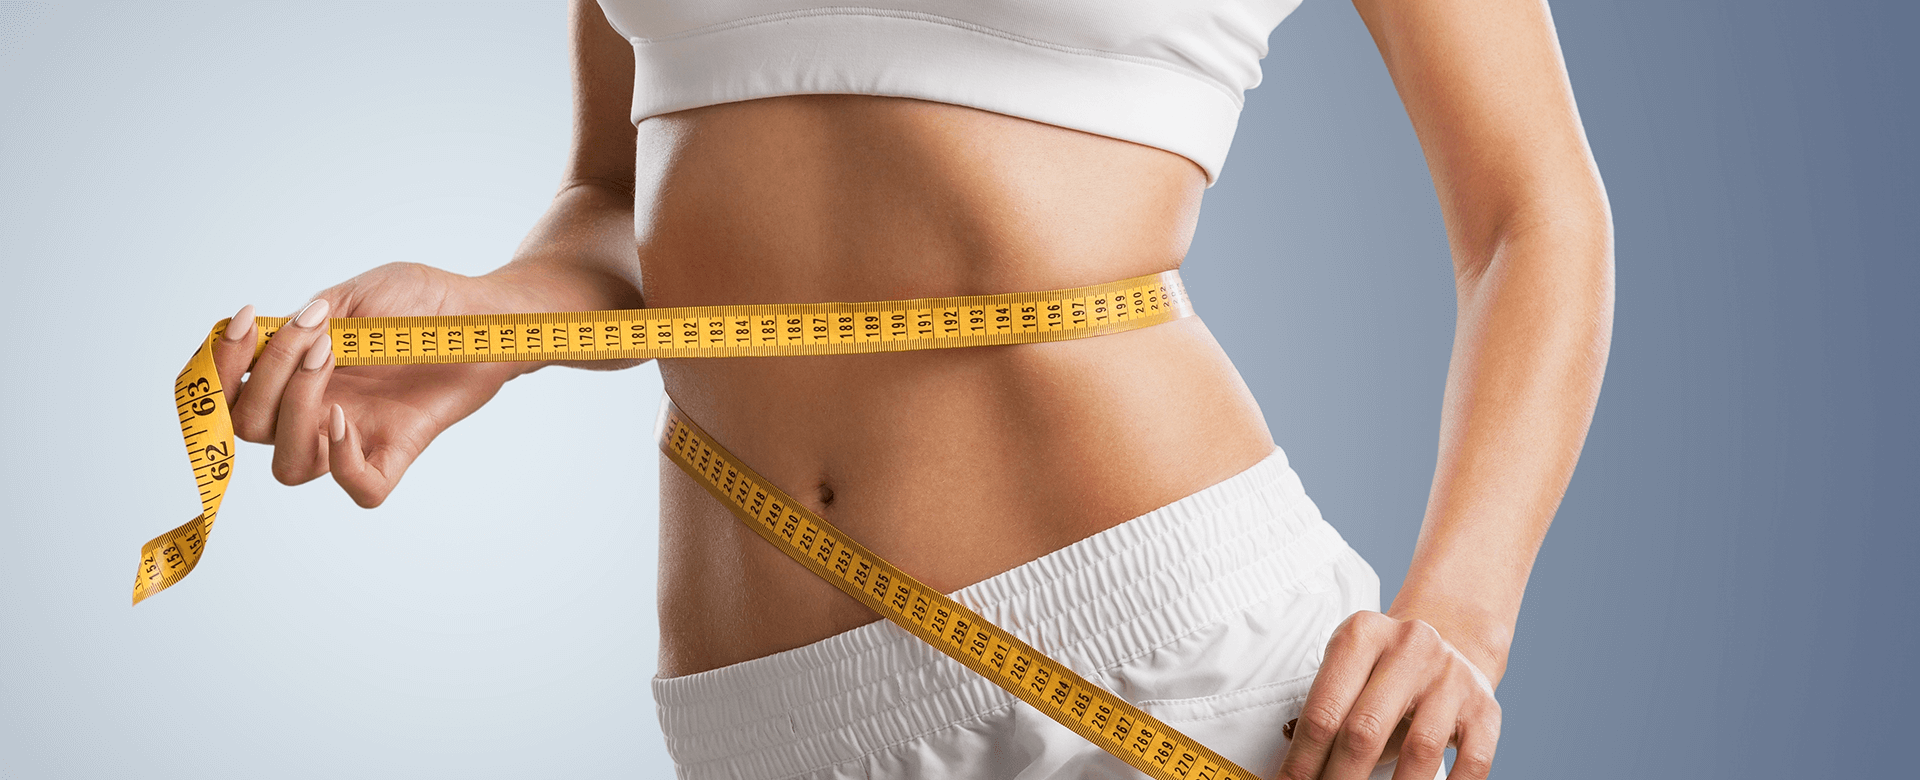 HGH for Weight Loss - Measuring Slim Waist